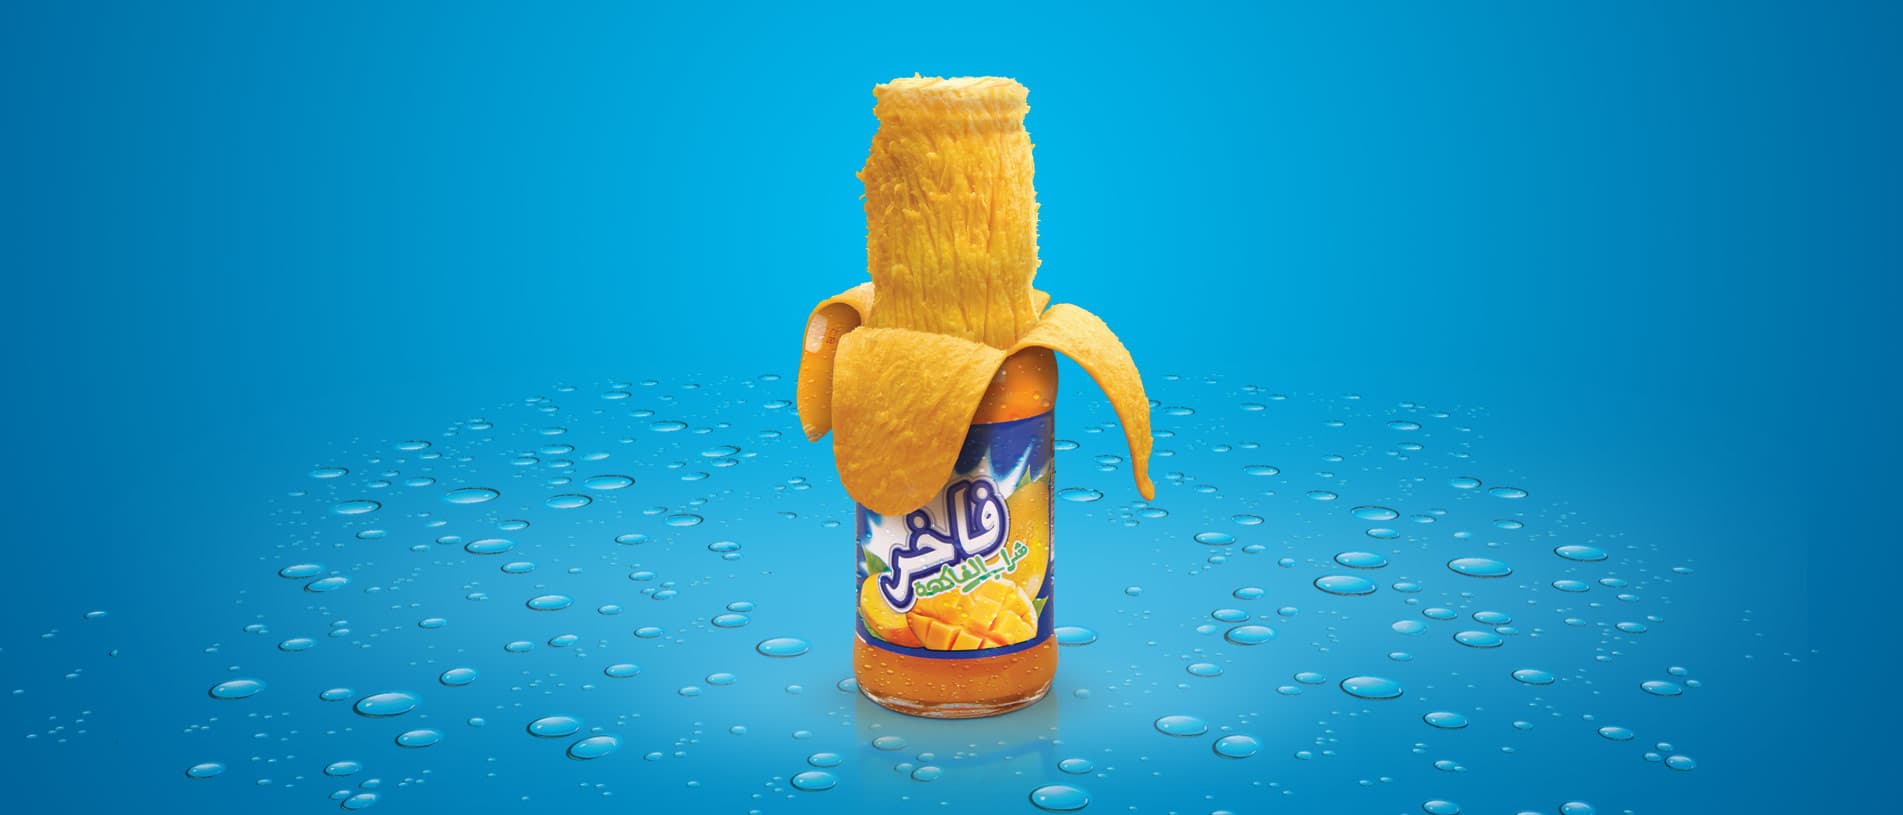 Advertising campaign<br>fakher drink